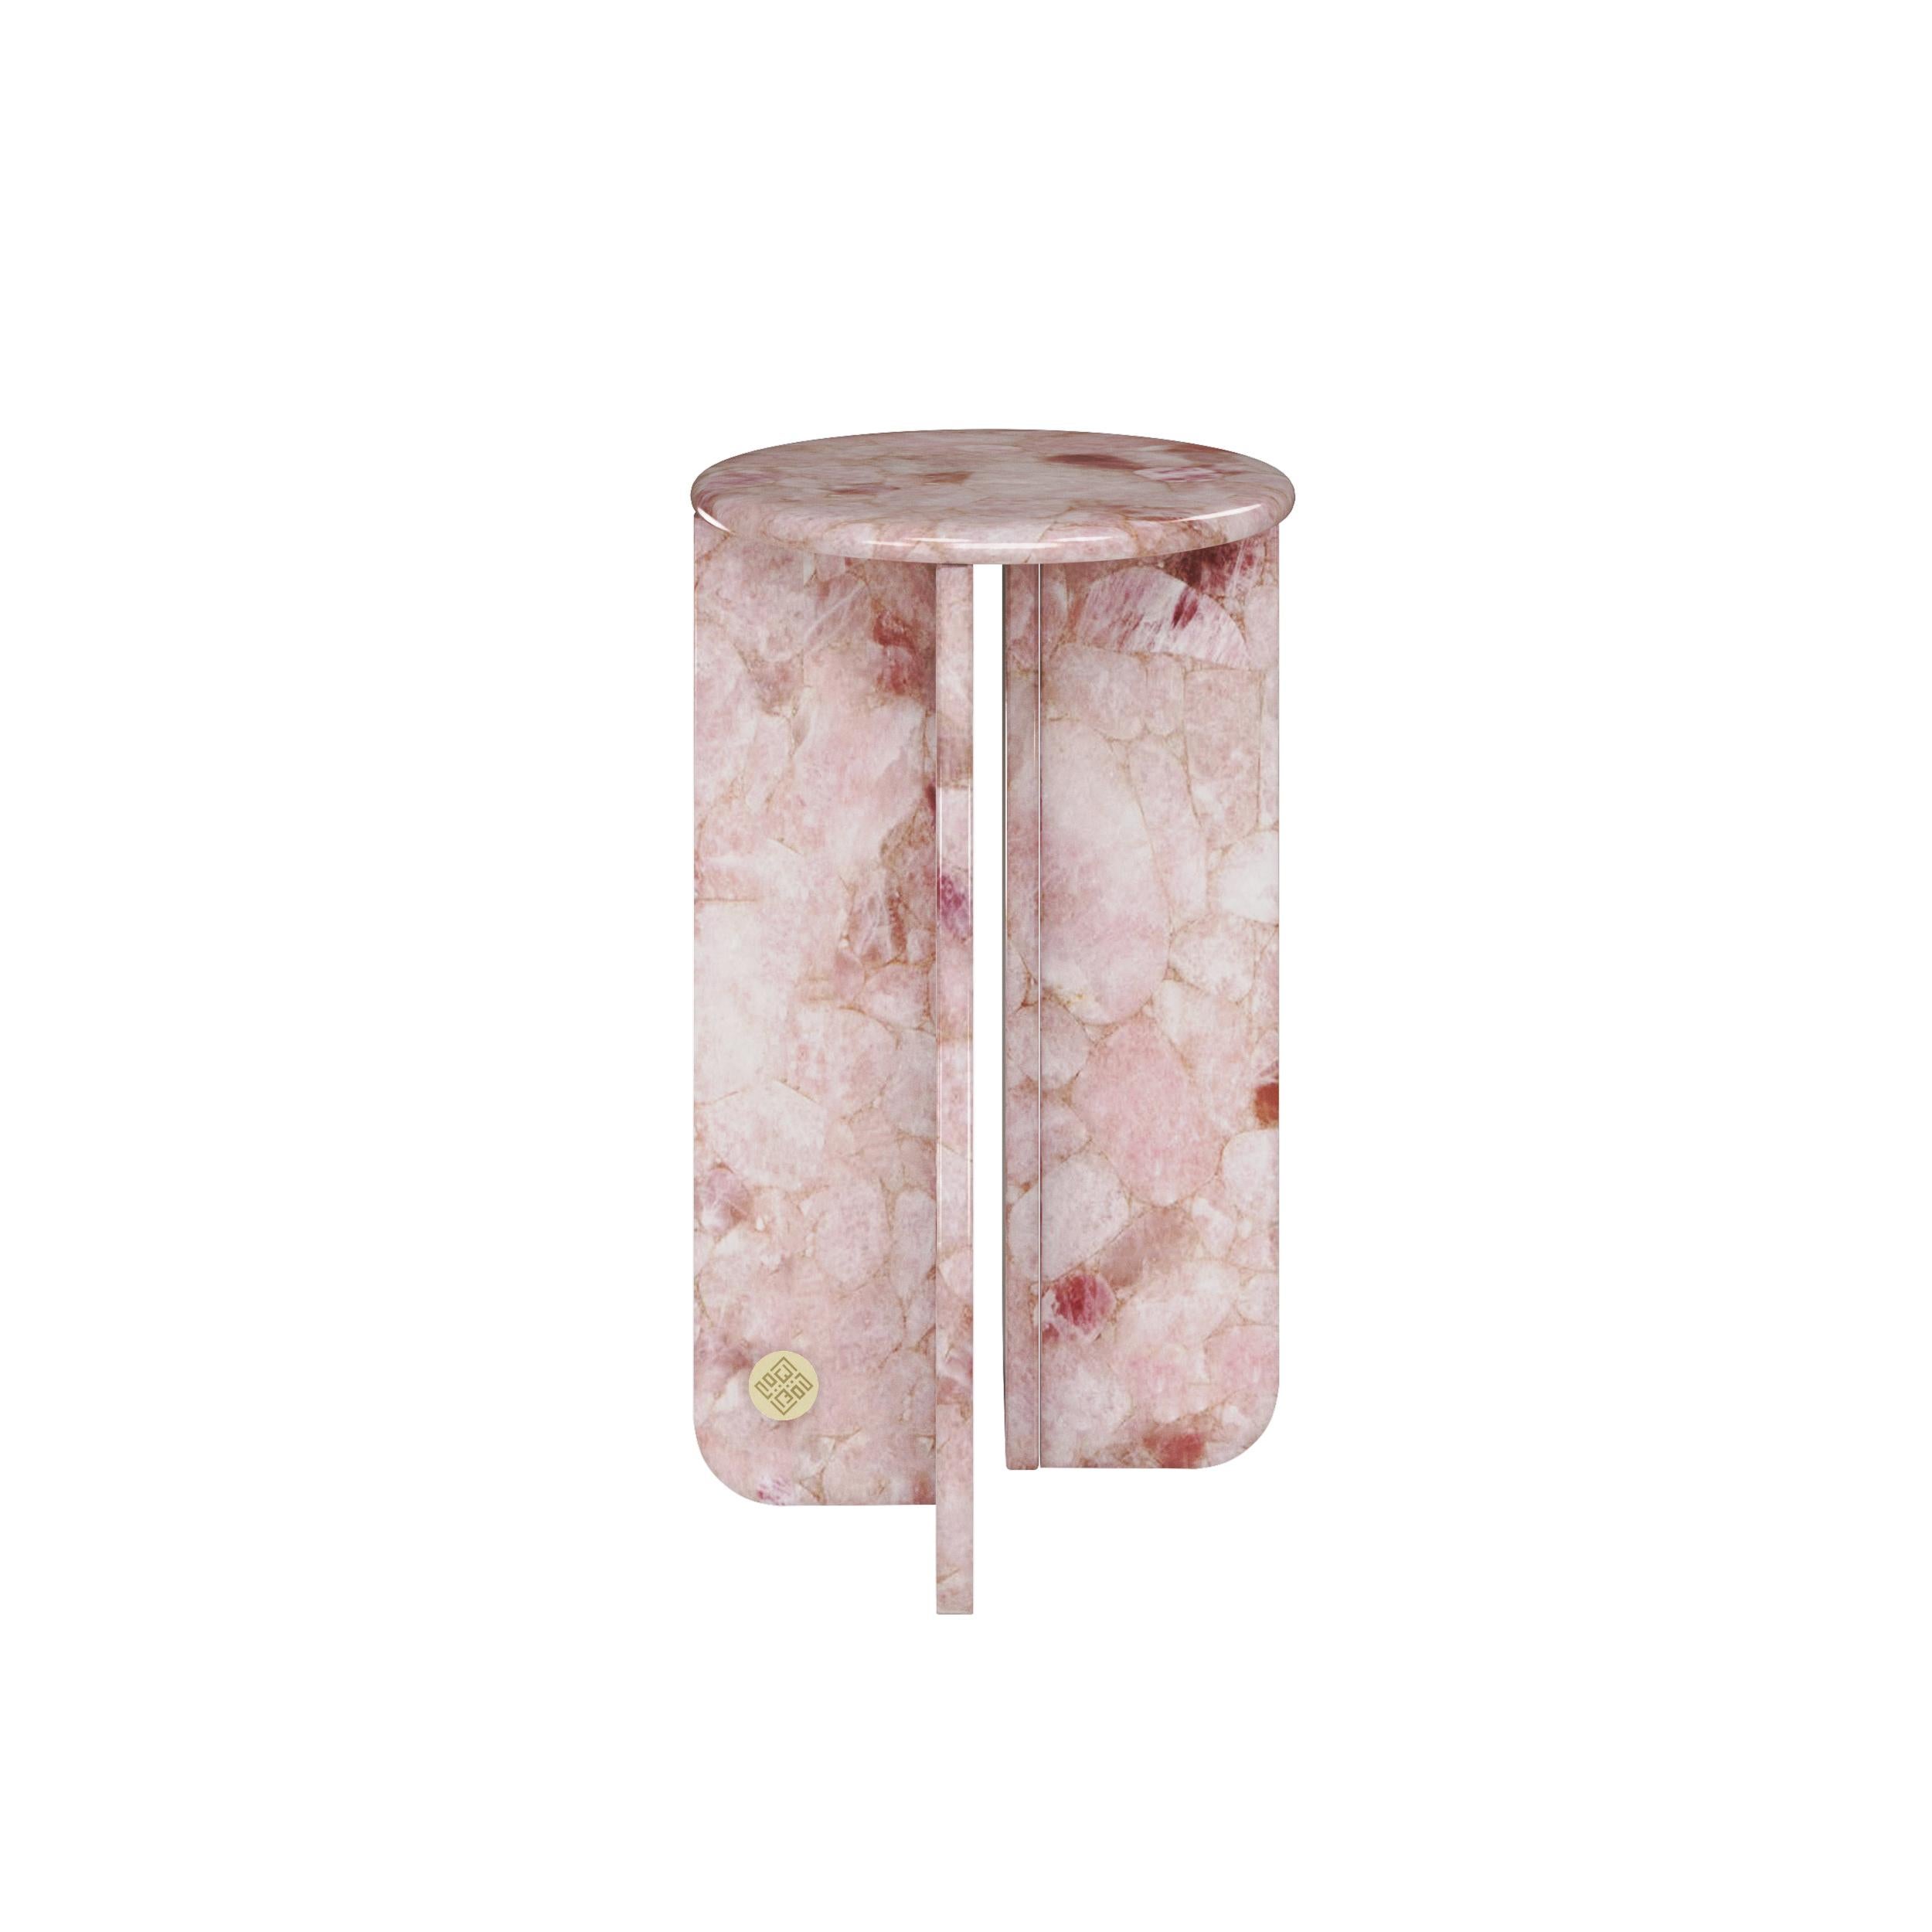 Quartz betty baby love side table hand-sculpted by Element&Co
Dimensions: 35 Ø x 60 cm
Materials: Rose quartz, precious stone 


elementandco is a multidisciplinary studio based in Madrid, created by French-Spanish designer Sasha Sanchez and